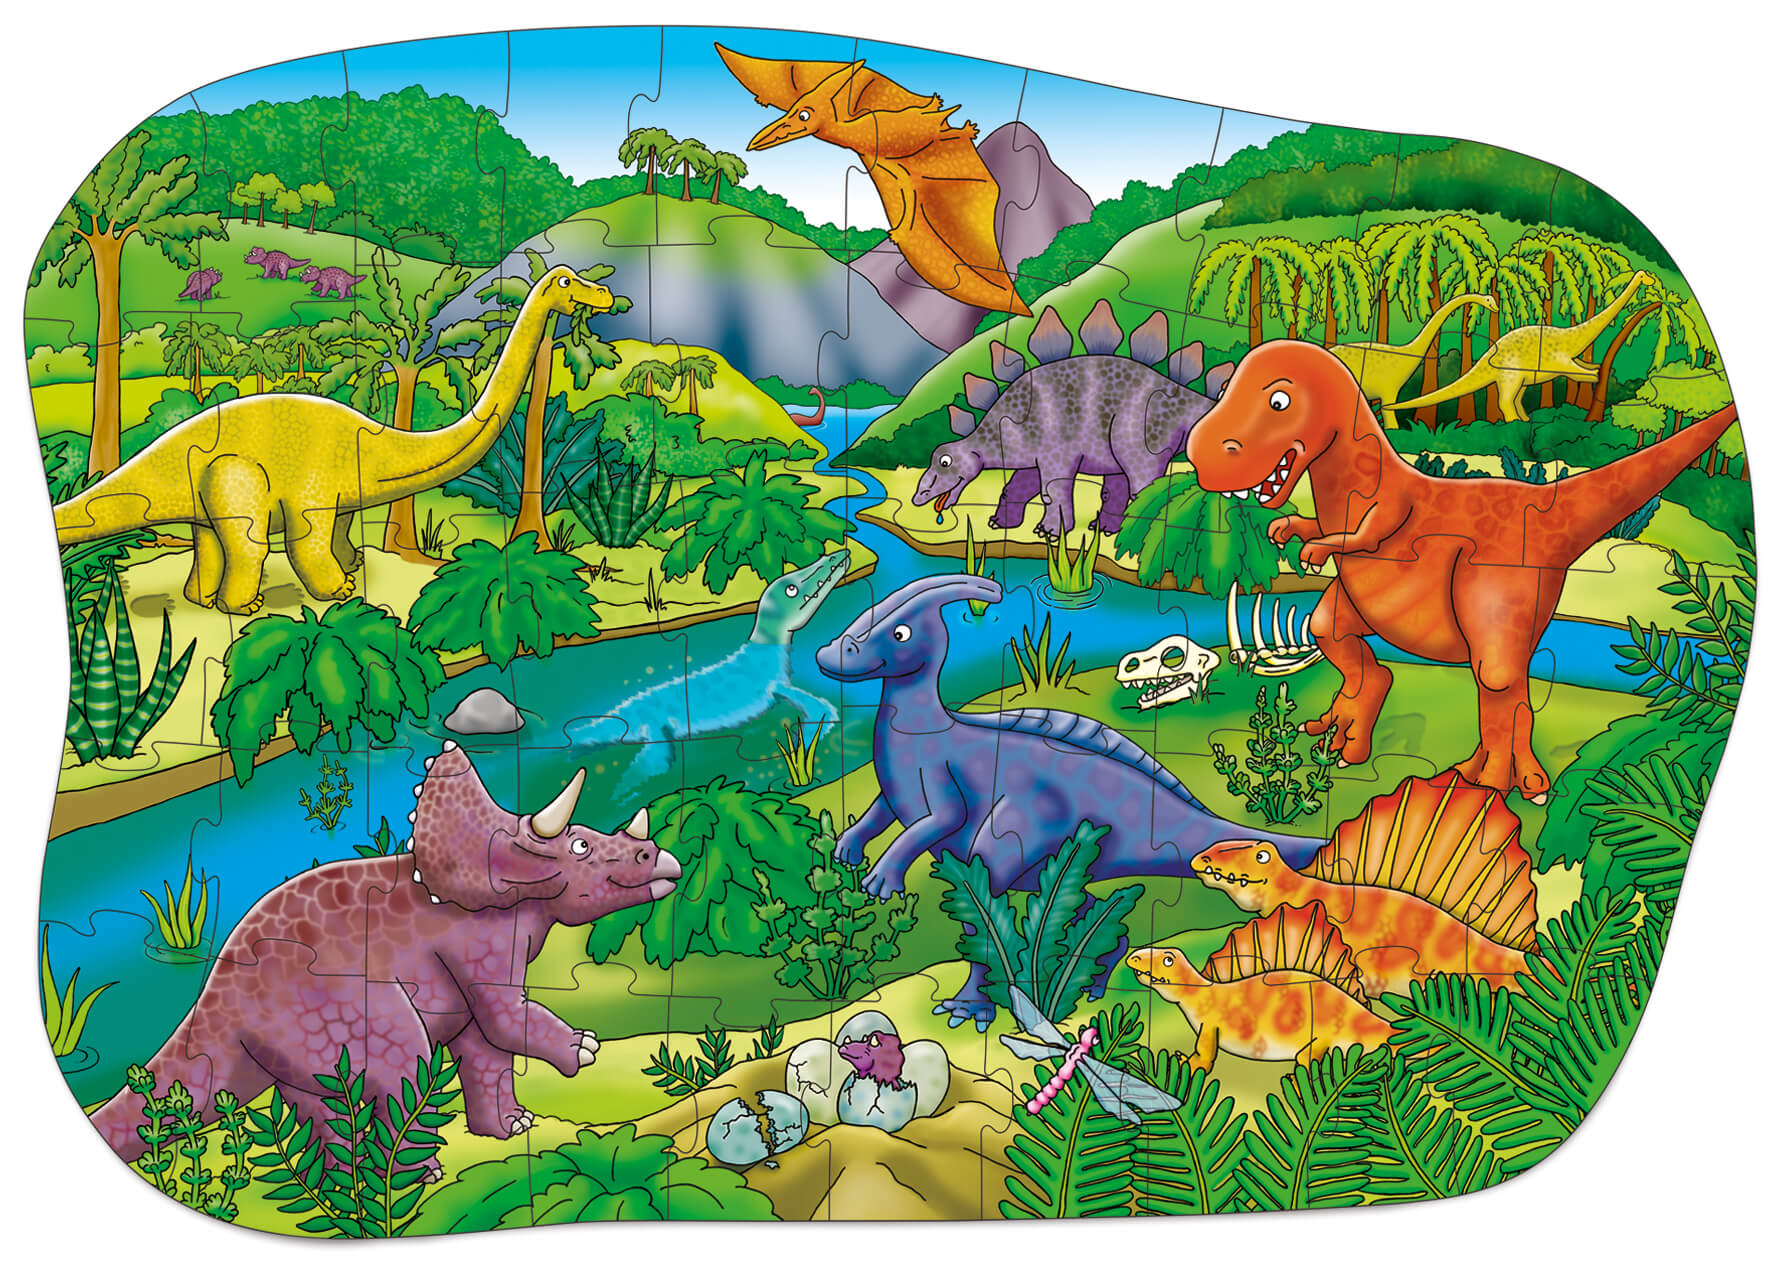 Puzzle View - Big Dinosaurs Jigsaw Puzzle